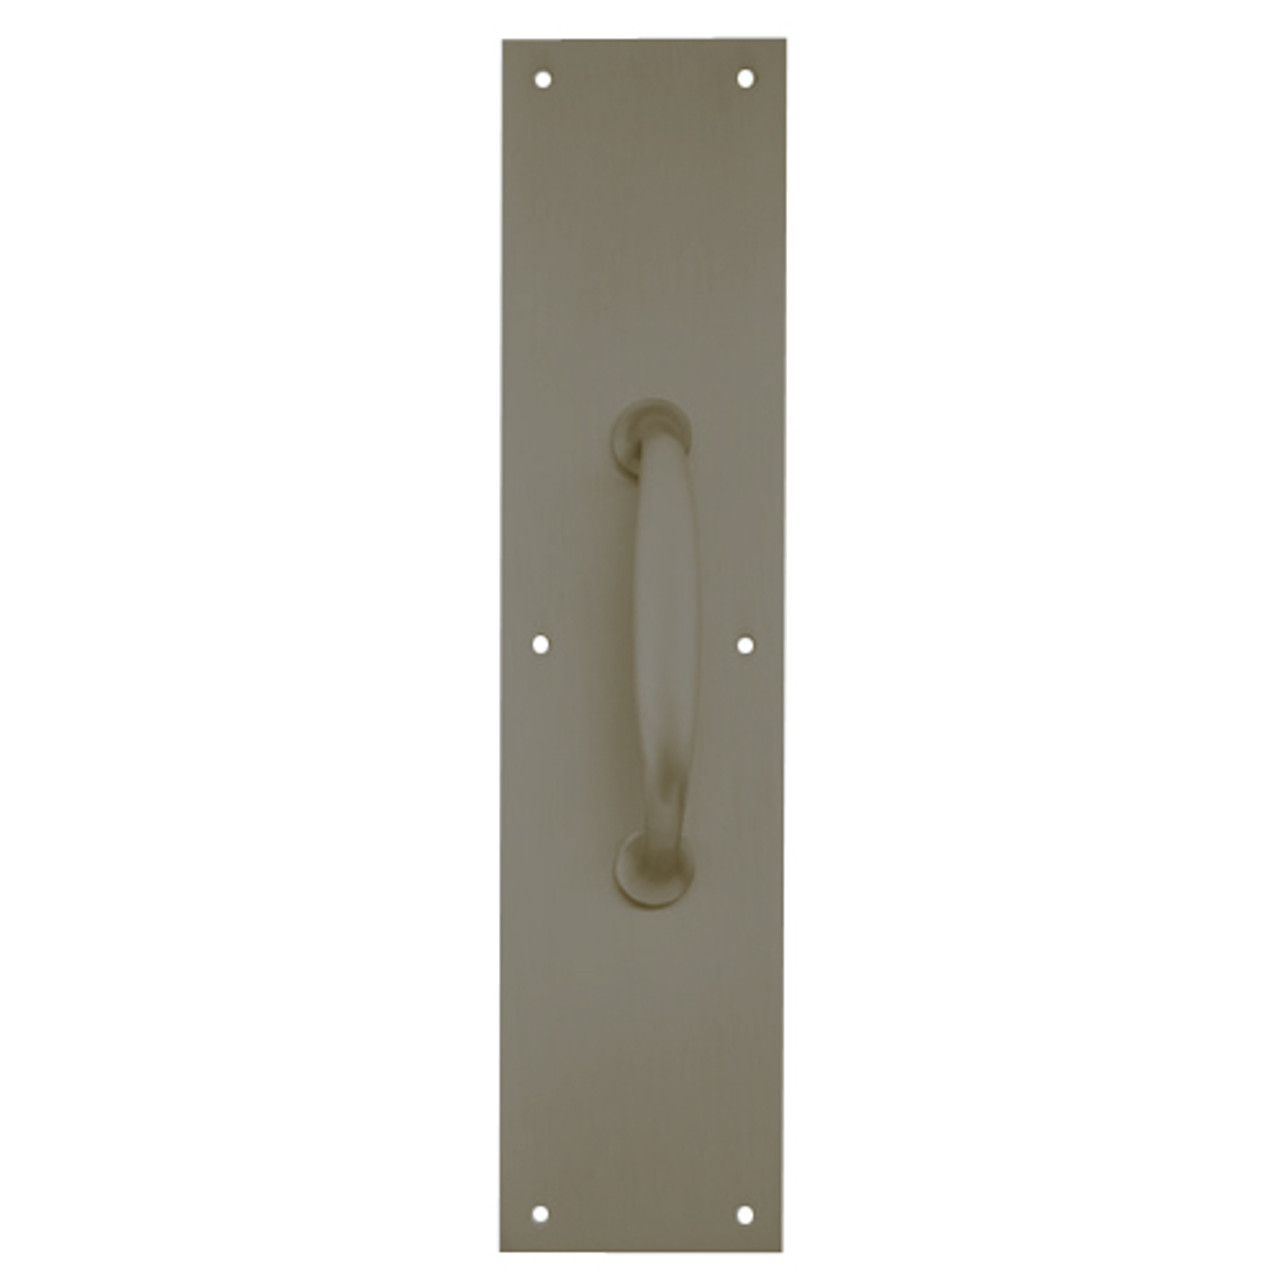 8311-5-US10B-4x16 IVES Architectural Door Trim 4x16 Inch Pull Plate in Oil Rubbed Bronze